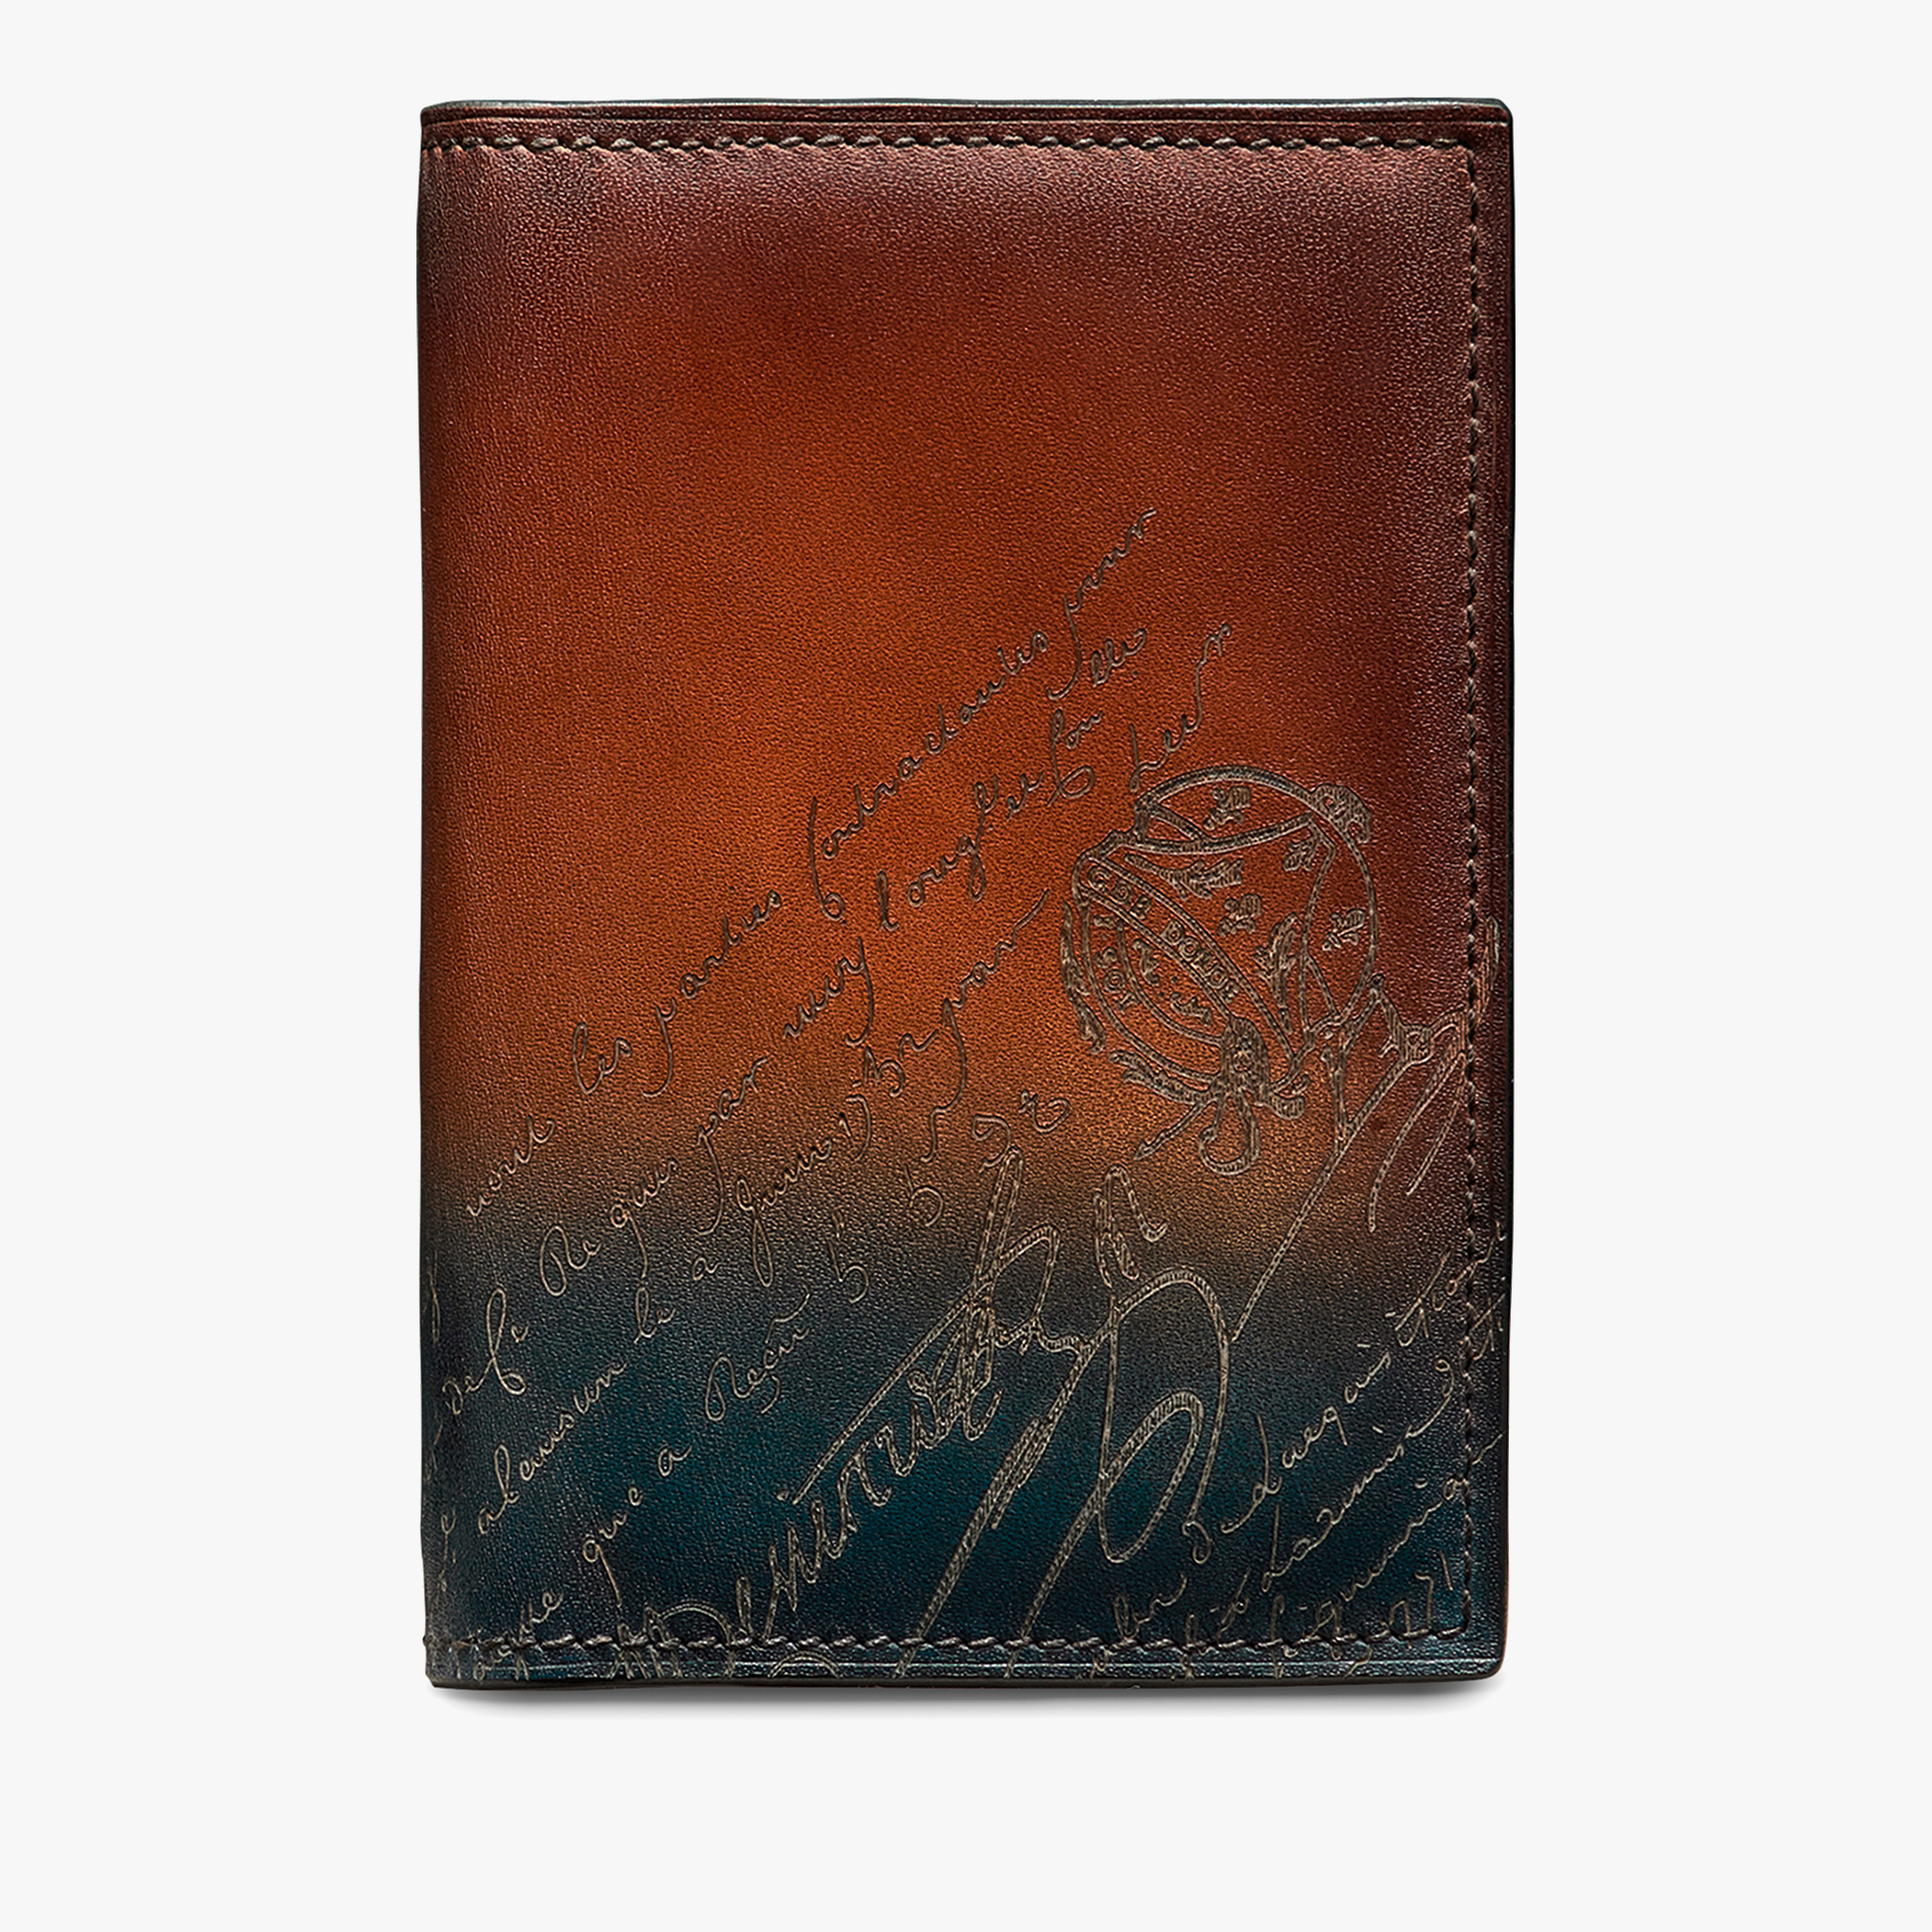 Jagua Scritto Leather Card Holder, CLOUDY CACAO, hi-res